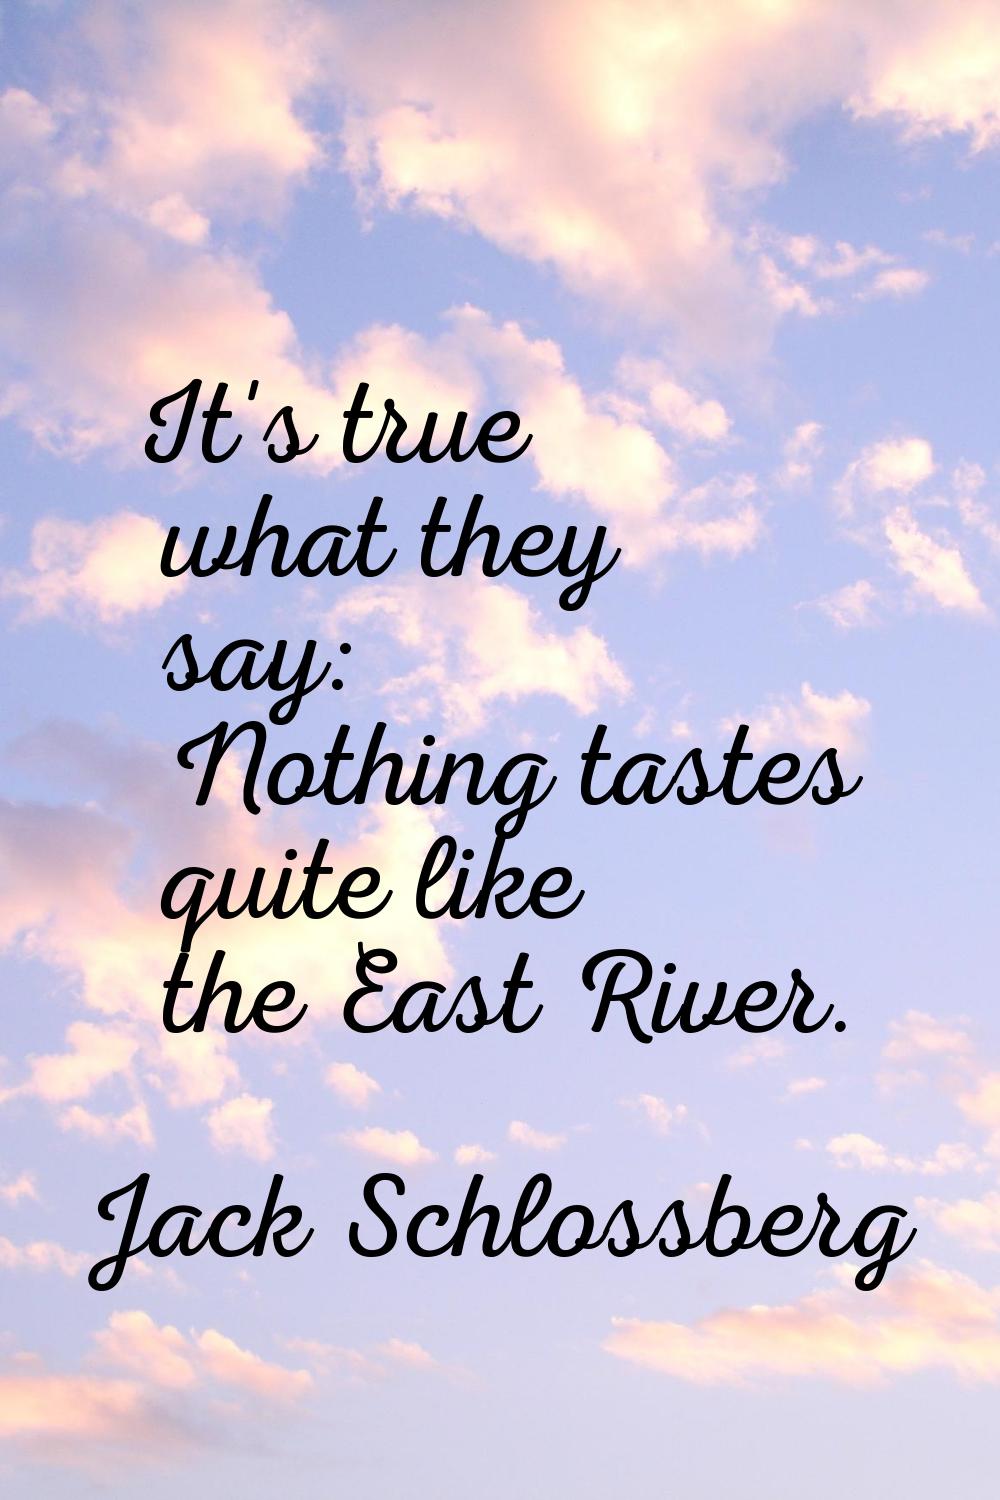 It's true what they say: Nothing tastes quite like the East River.